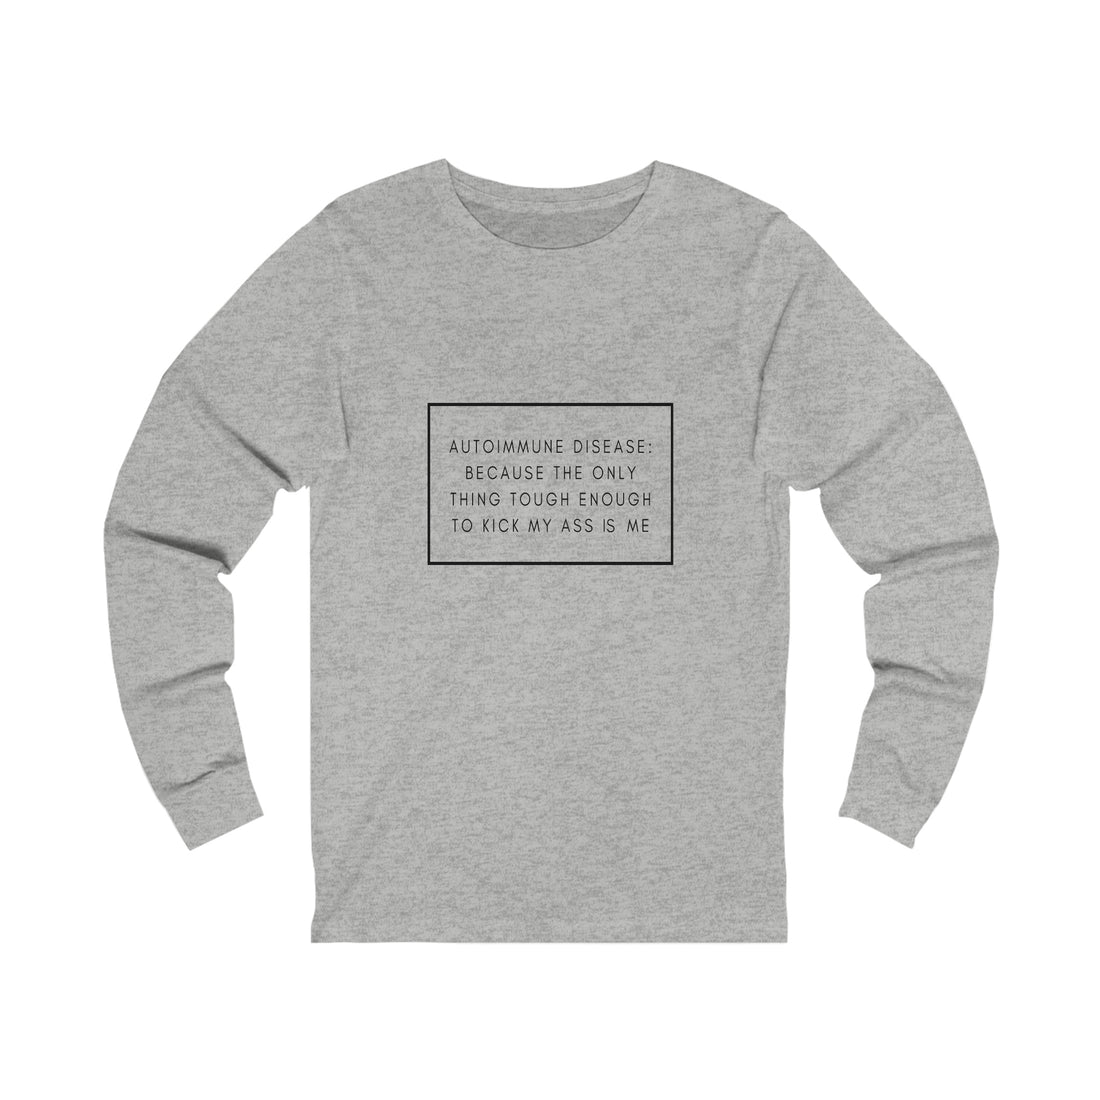 Autoimmune Disease Because The Only Thing Tough Enough To Kick My Ass Is Me - Unisex Jersey Long Sleeve Tee